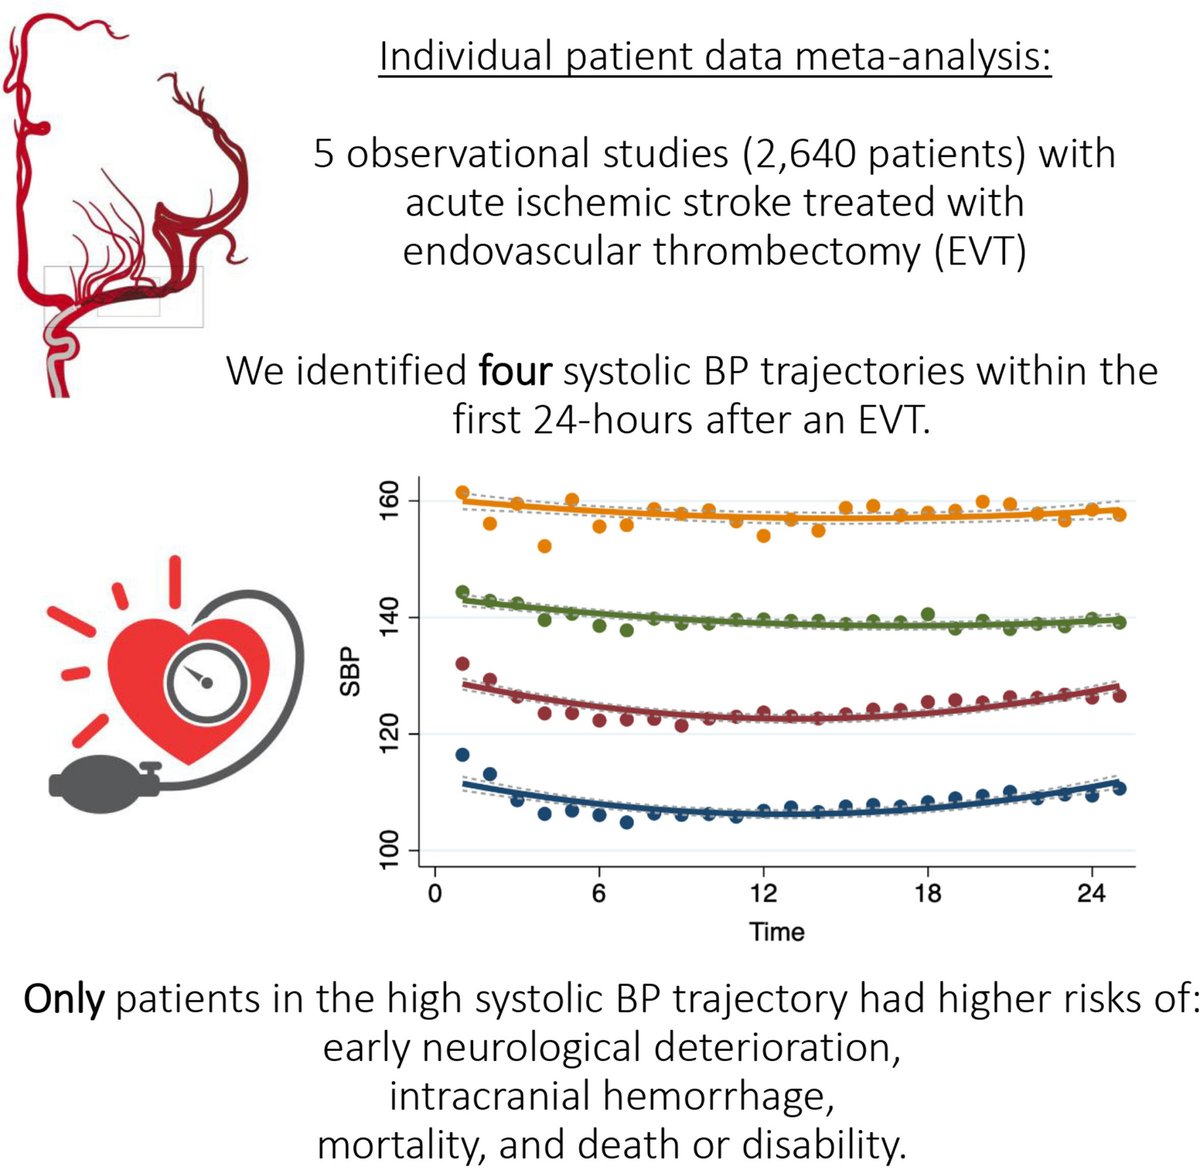 ~~ToMoRrOw~~
Please join @carmendemigue12 for a #HypHIP Live Author Chat with @ArKatsanos

Tuesday May 21, 14:00-15:00 UTC

Blood pressure trajectories and outcomes after endovascular thrombectomy for acute ischemic stroke ahajrnls.org/3I1ceUC